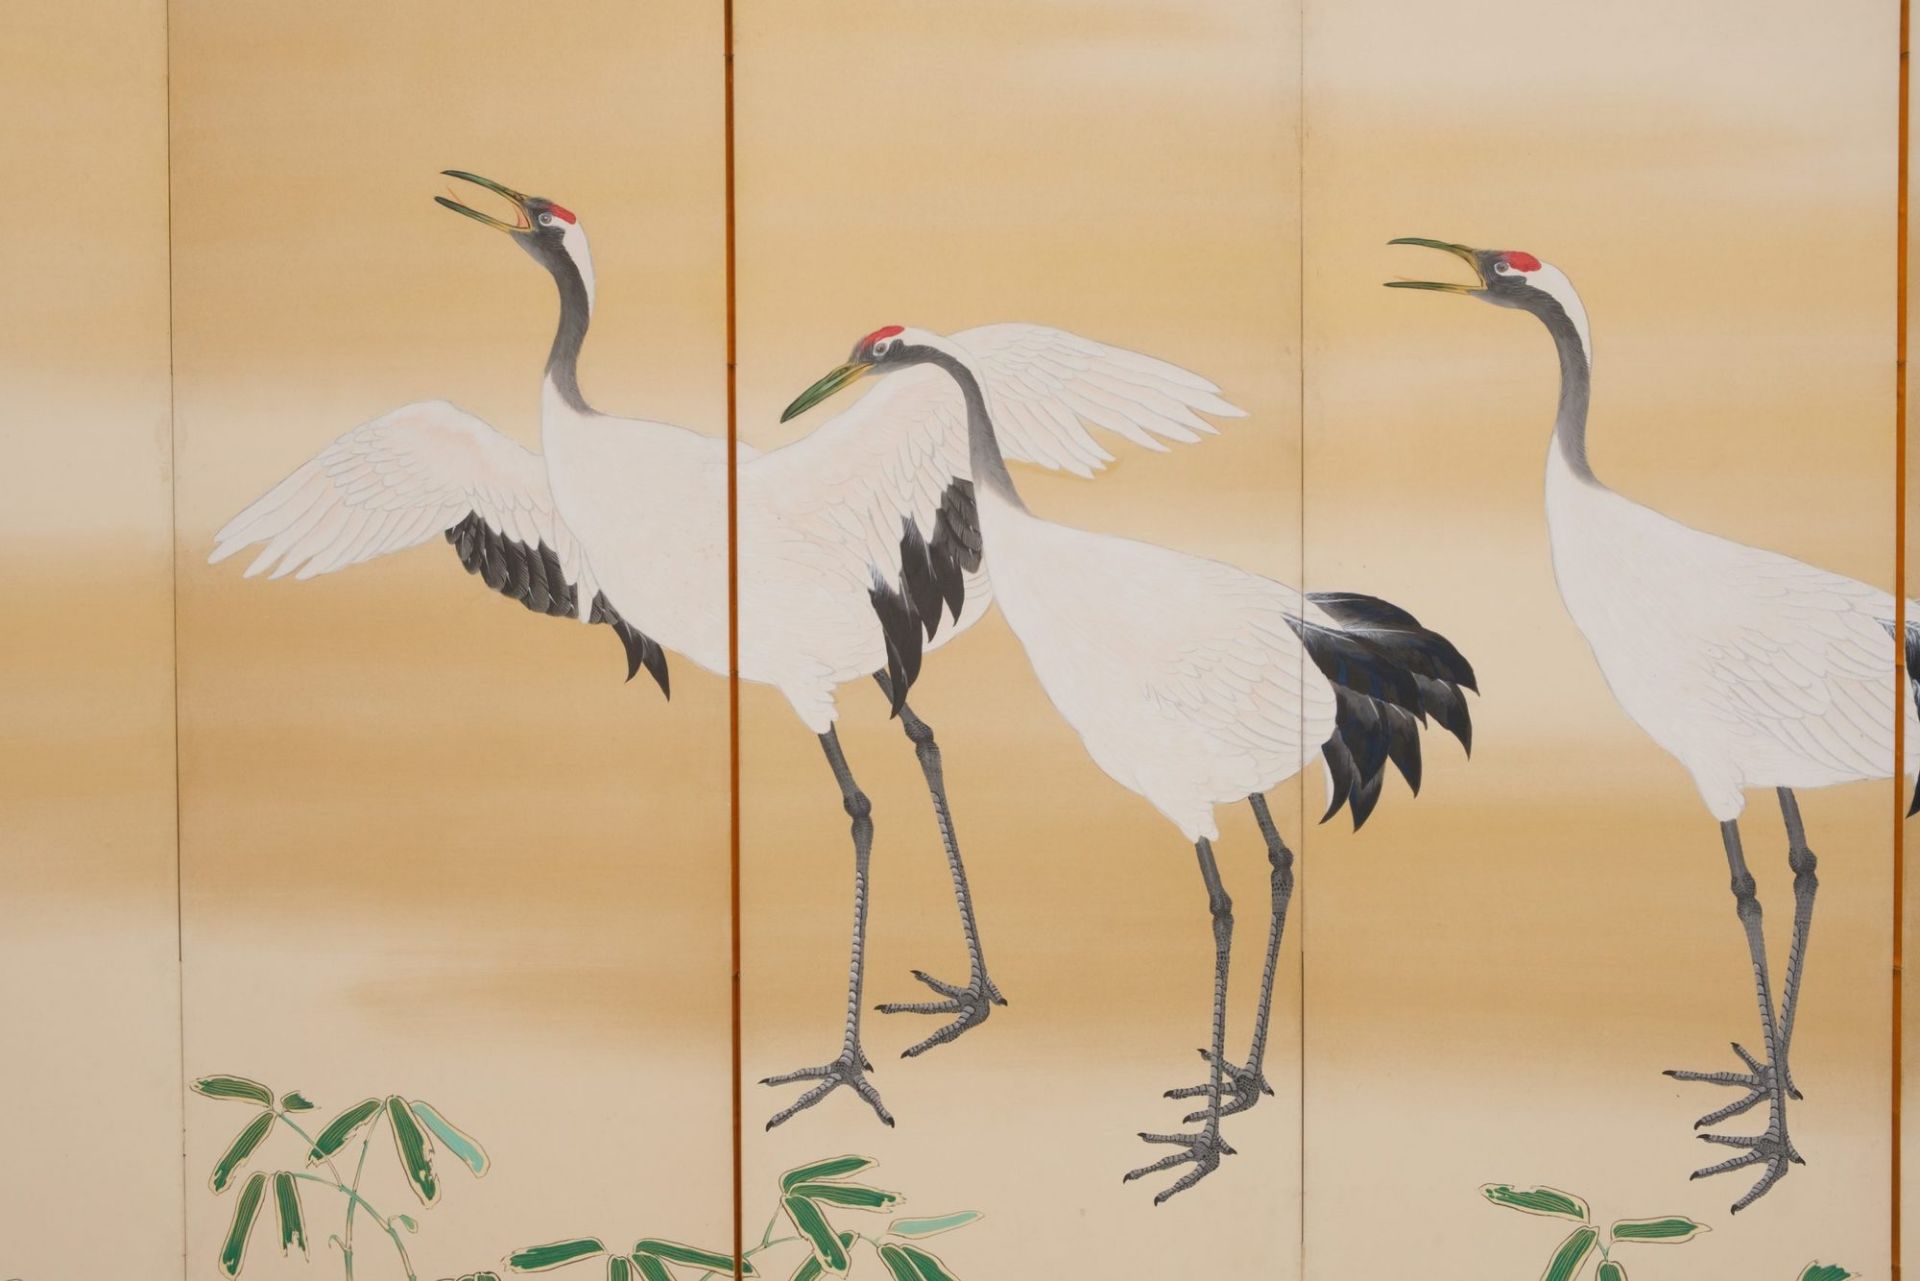 A JAPANESE MID-SIZE 6-PANEL RINPA STYLE BYÔBU (FOLDING SCREEN) WITH CRANES, FIRST HALF 20TH CENTURY - Image 8 of 13